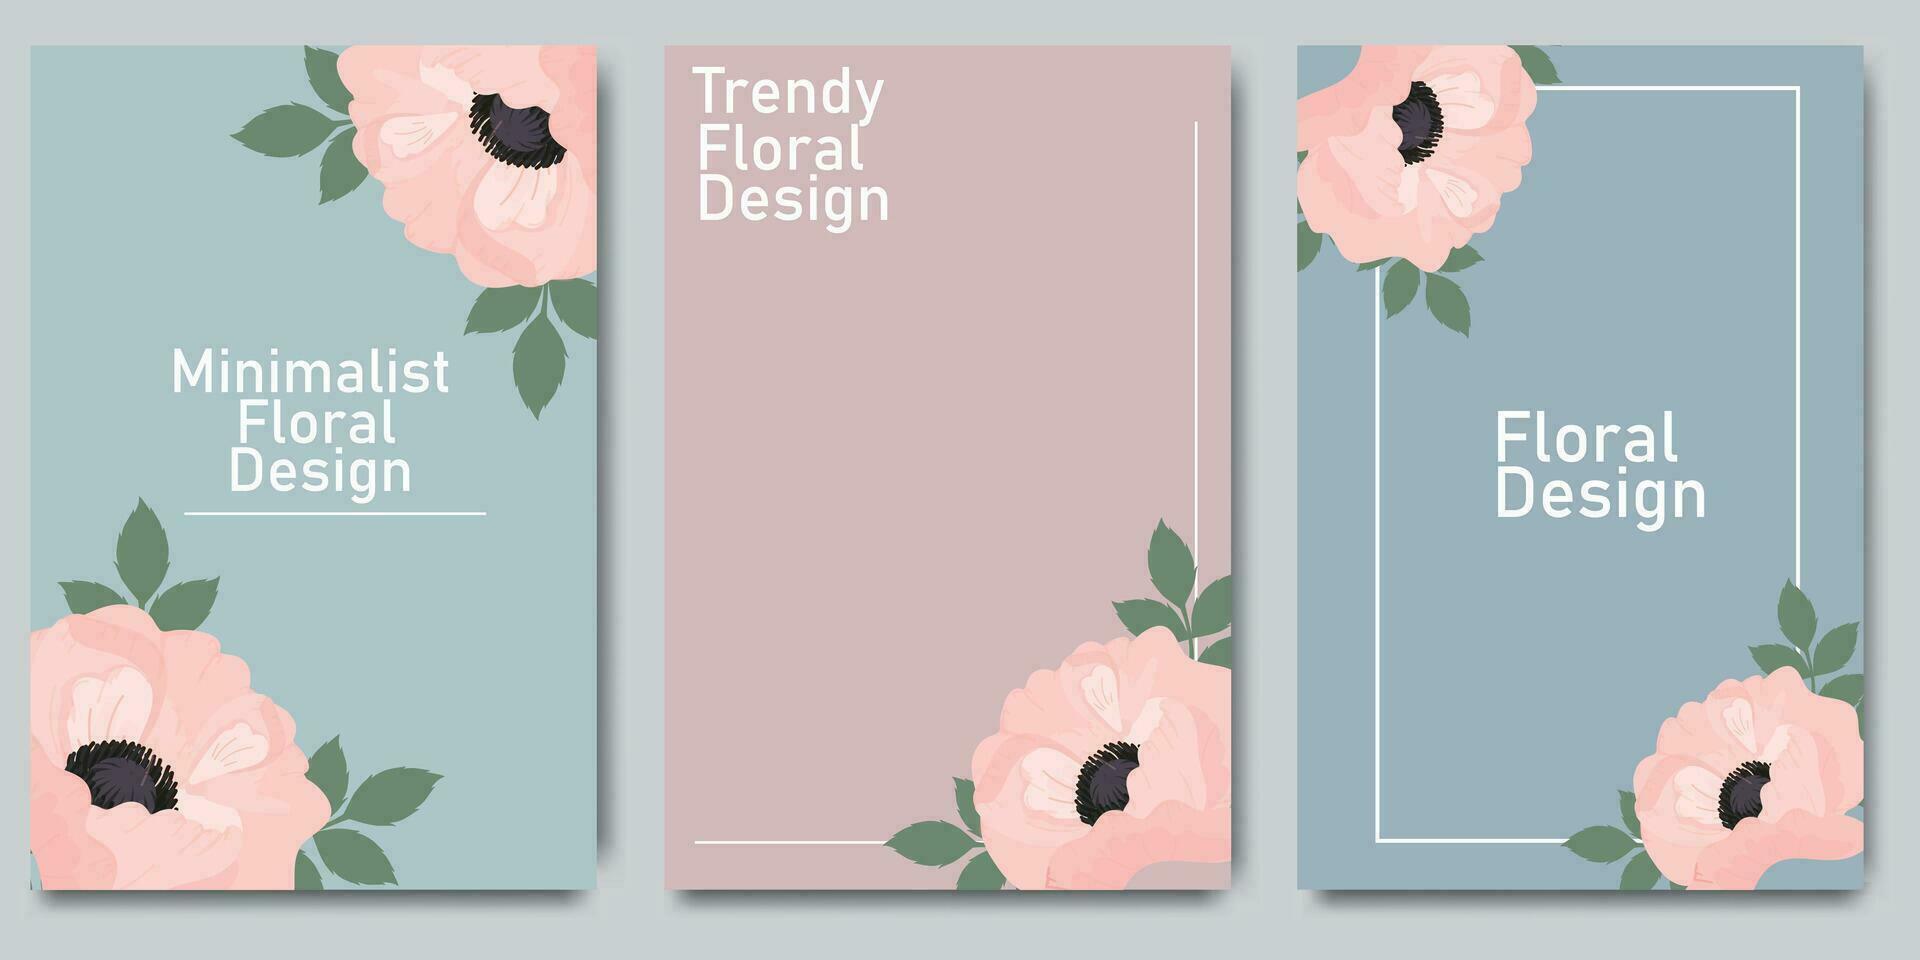 Minimalist Floral Design with peonies. Trendy floral branch and minimalist flowers. Templates for celebration, ads, branding, banner, cover, label, poster, wedding. vector